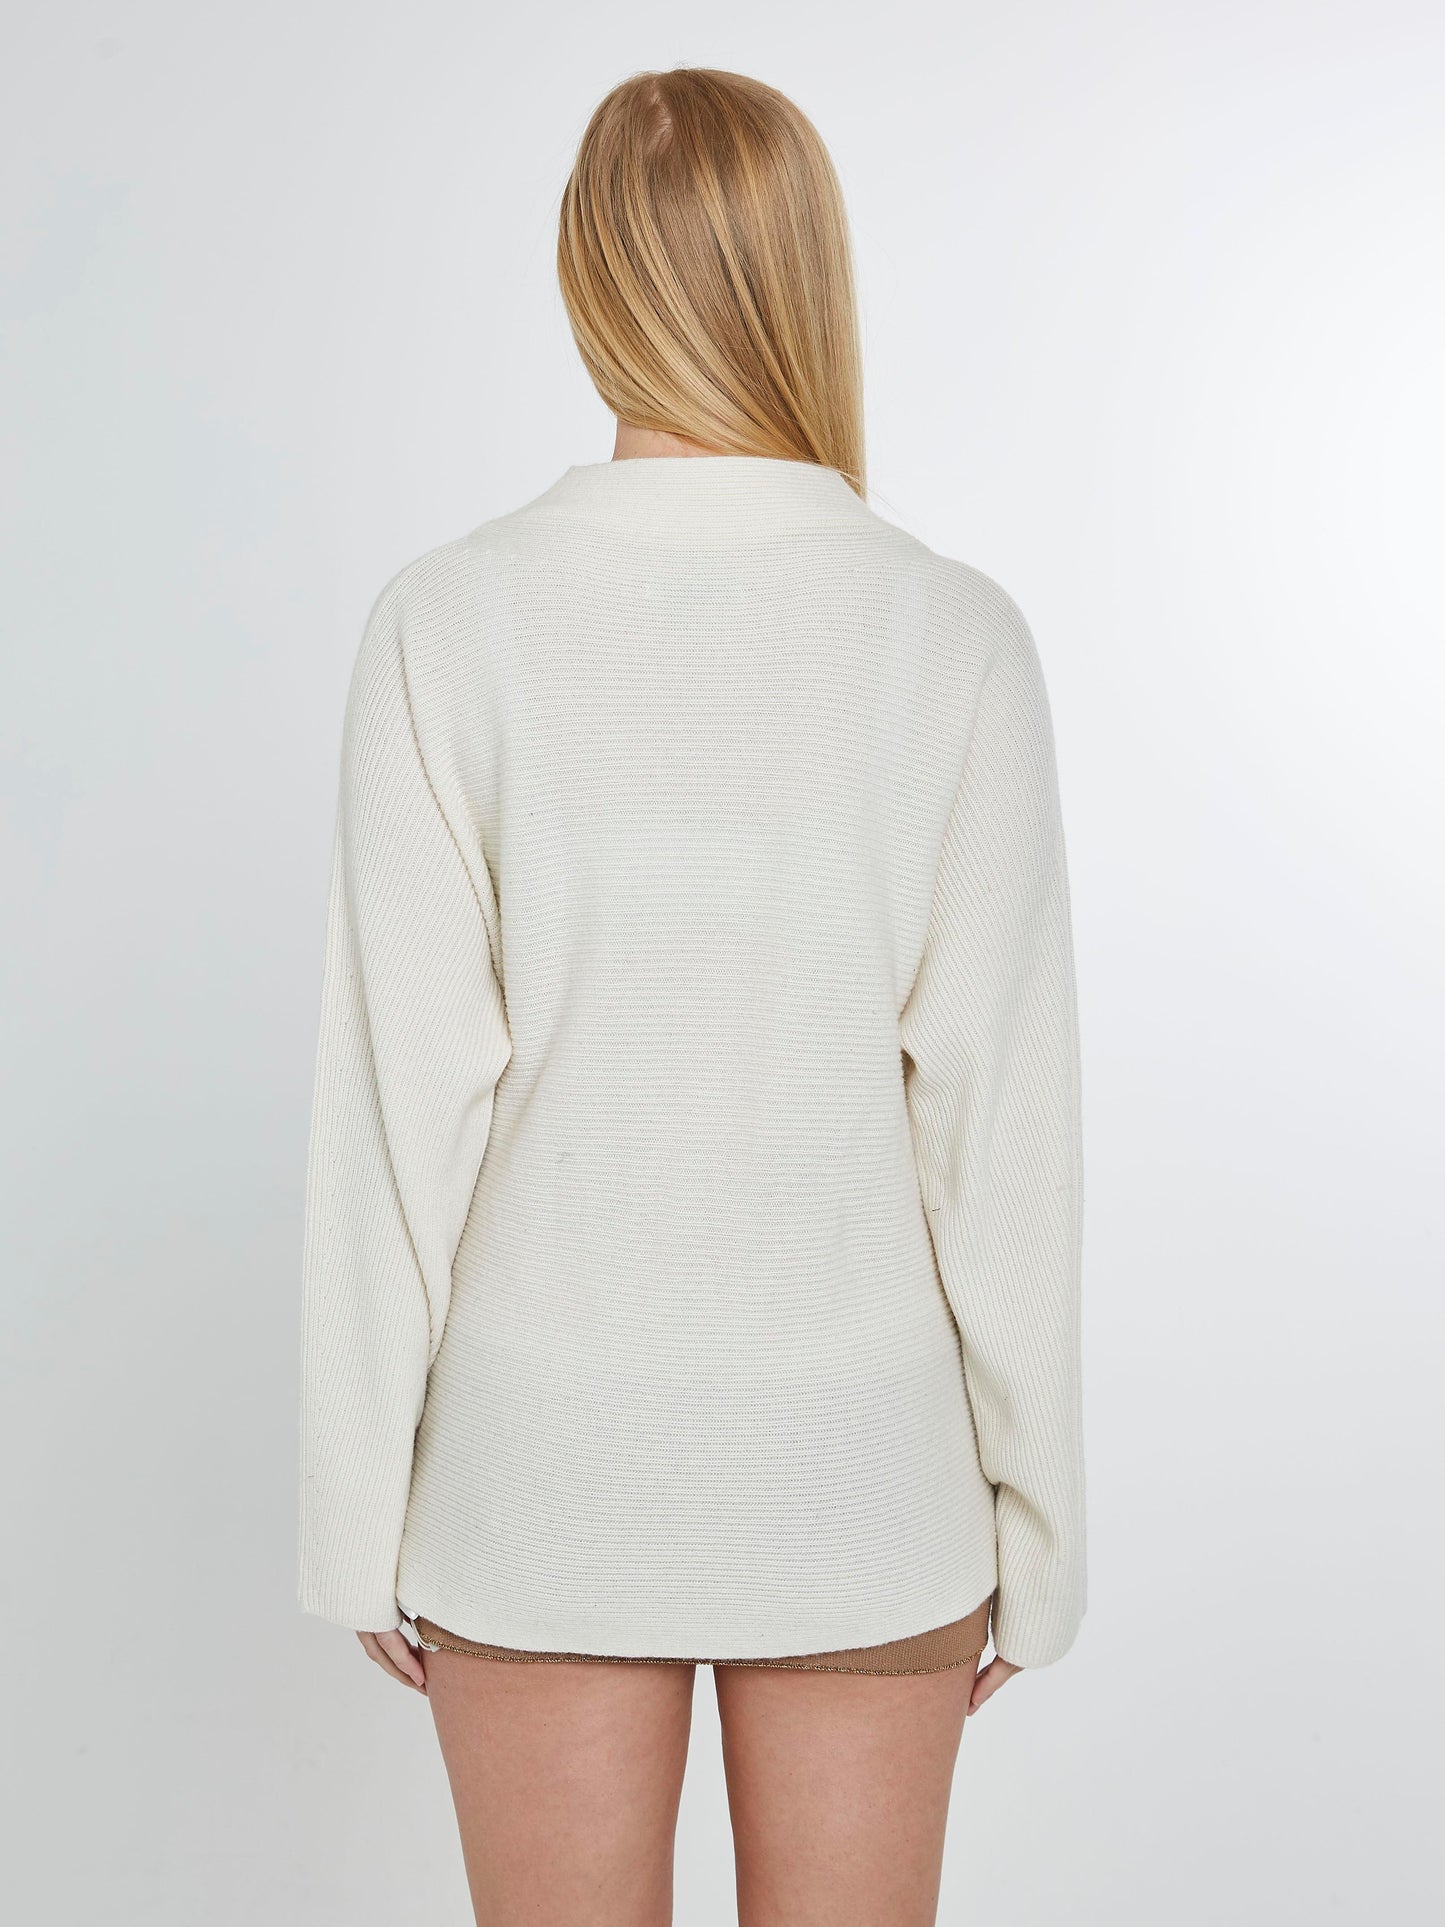 Beige sweater with center hole crystal trim